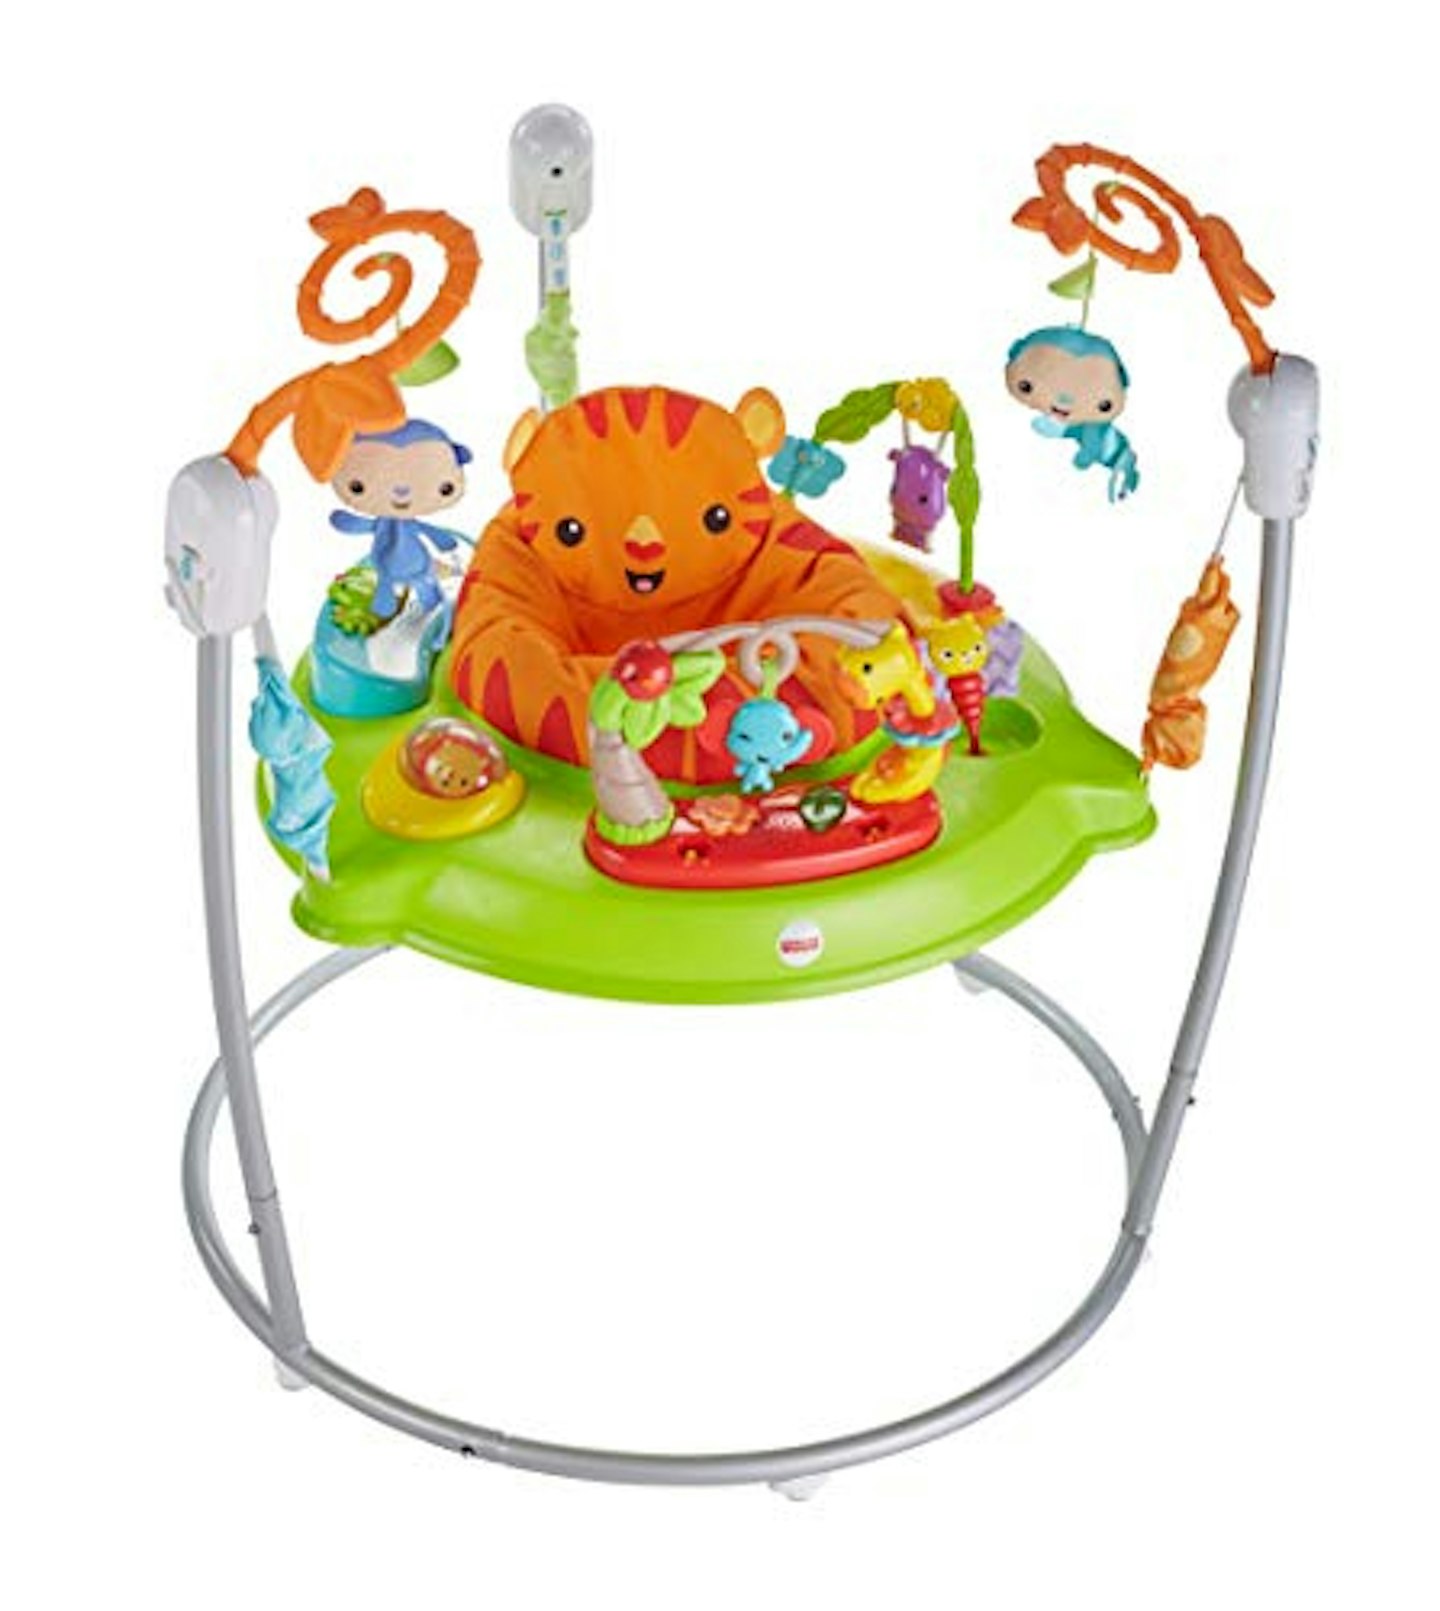 Fisher-Price CHM91 Roaring Rainforest Jumperoo